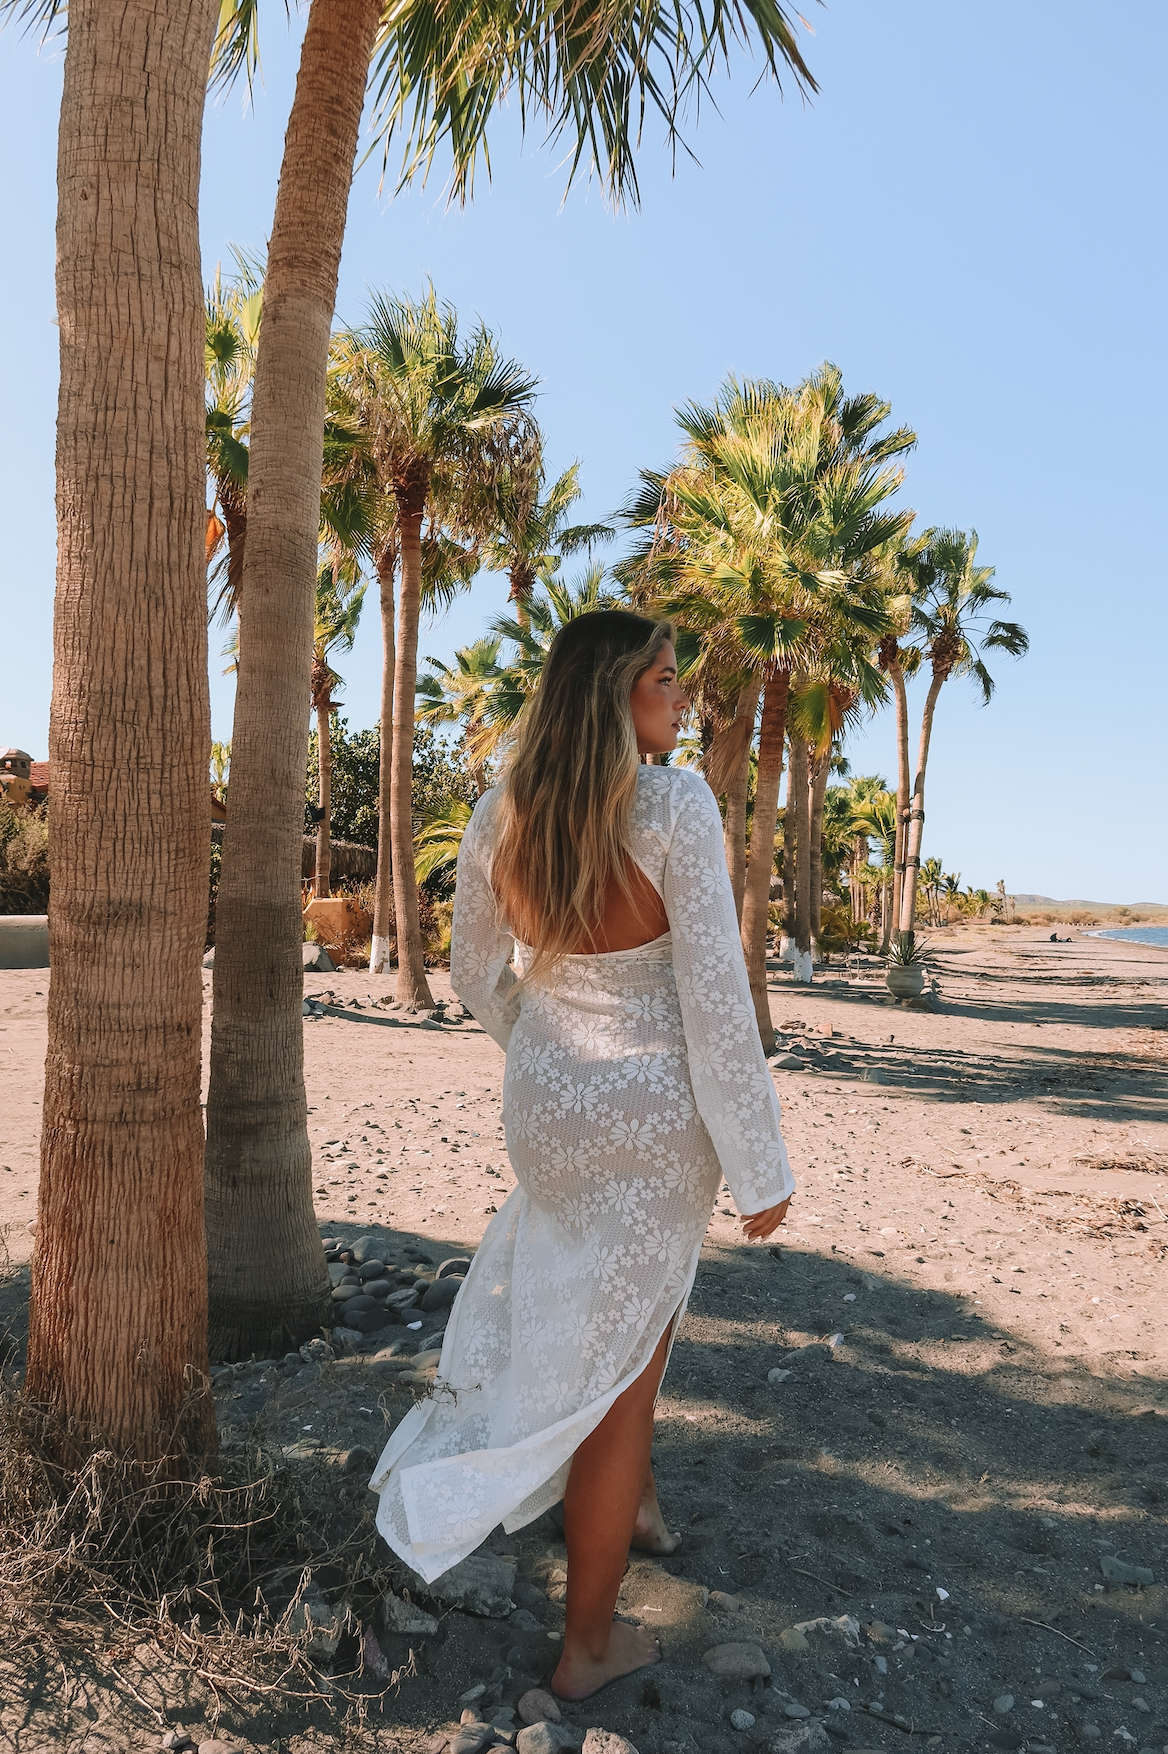 The Lacey Maxi Dress